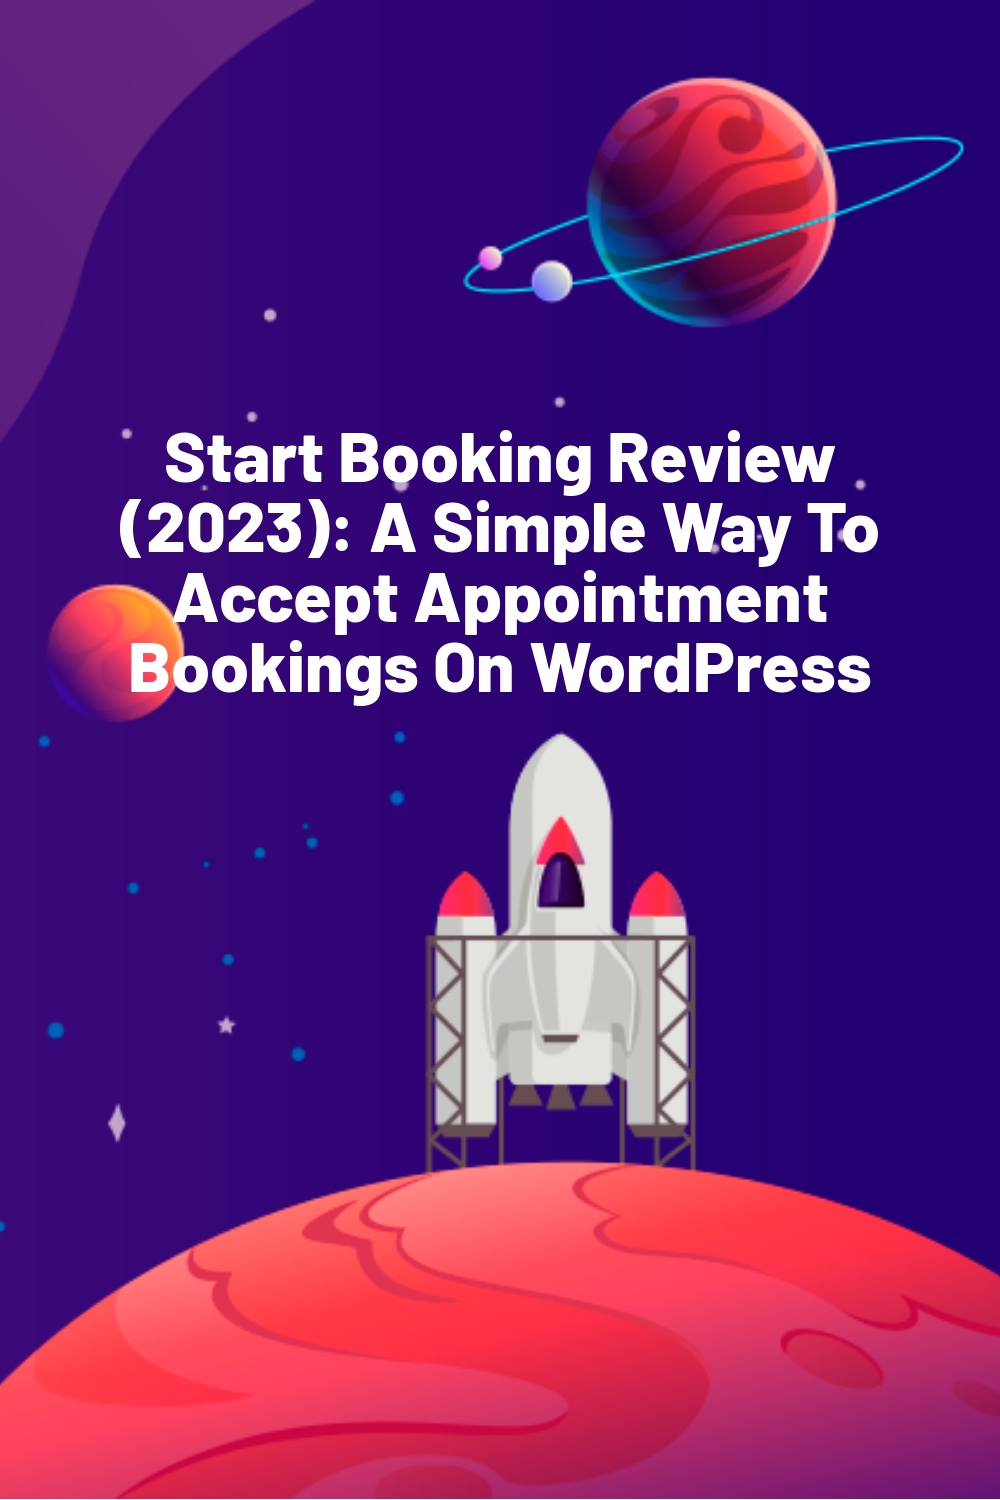 Start Booking Review (2023): A Simple Way To Accept Appointment Bookings On WordPress